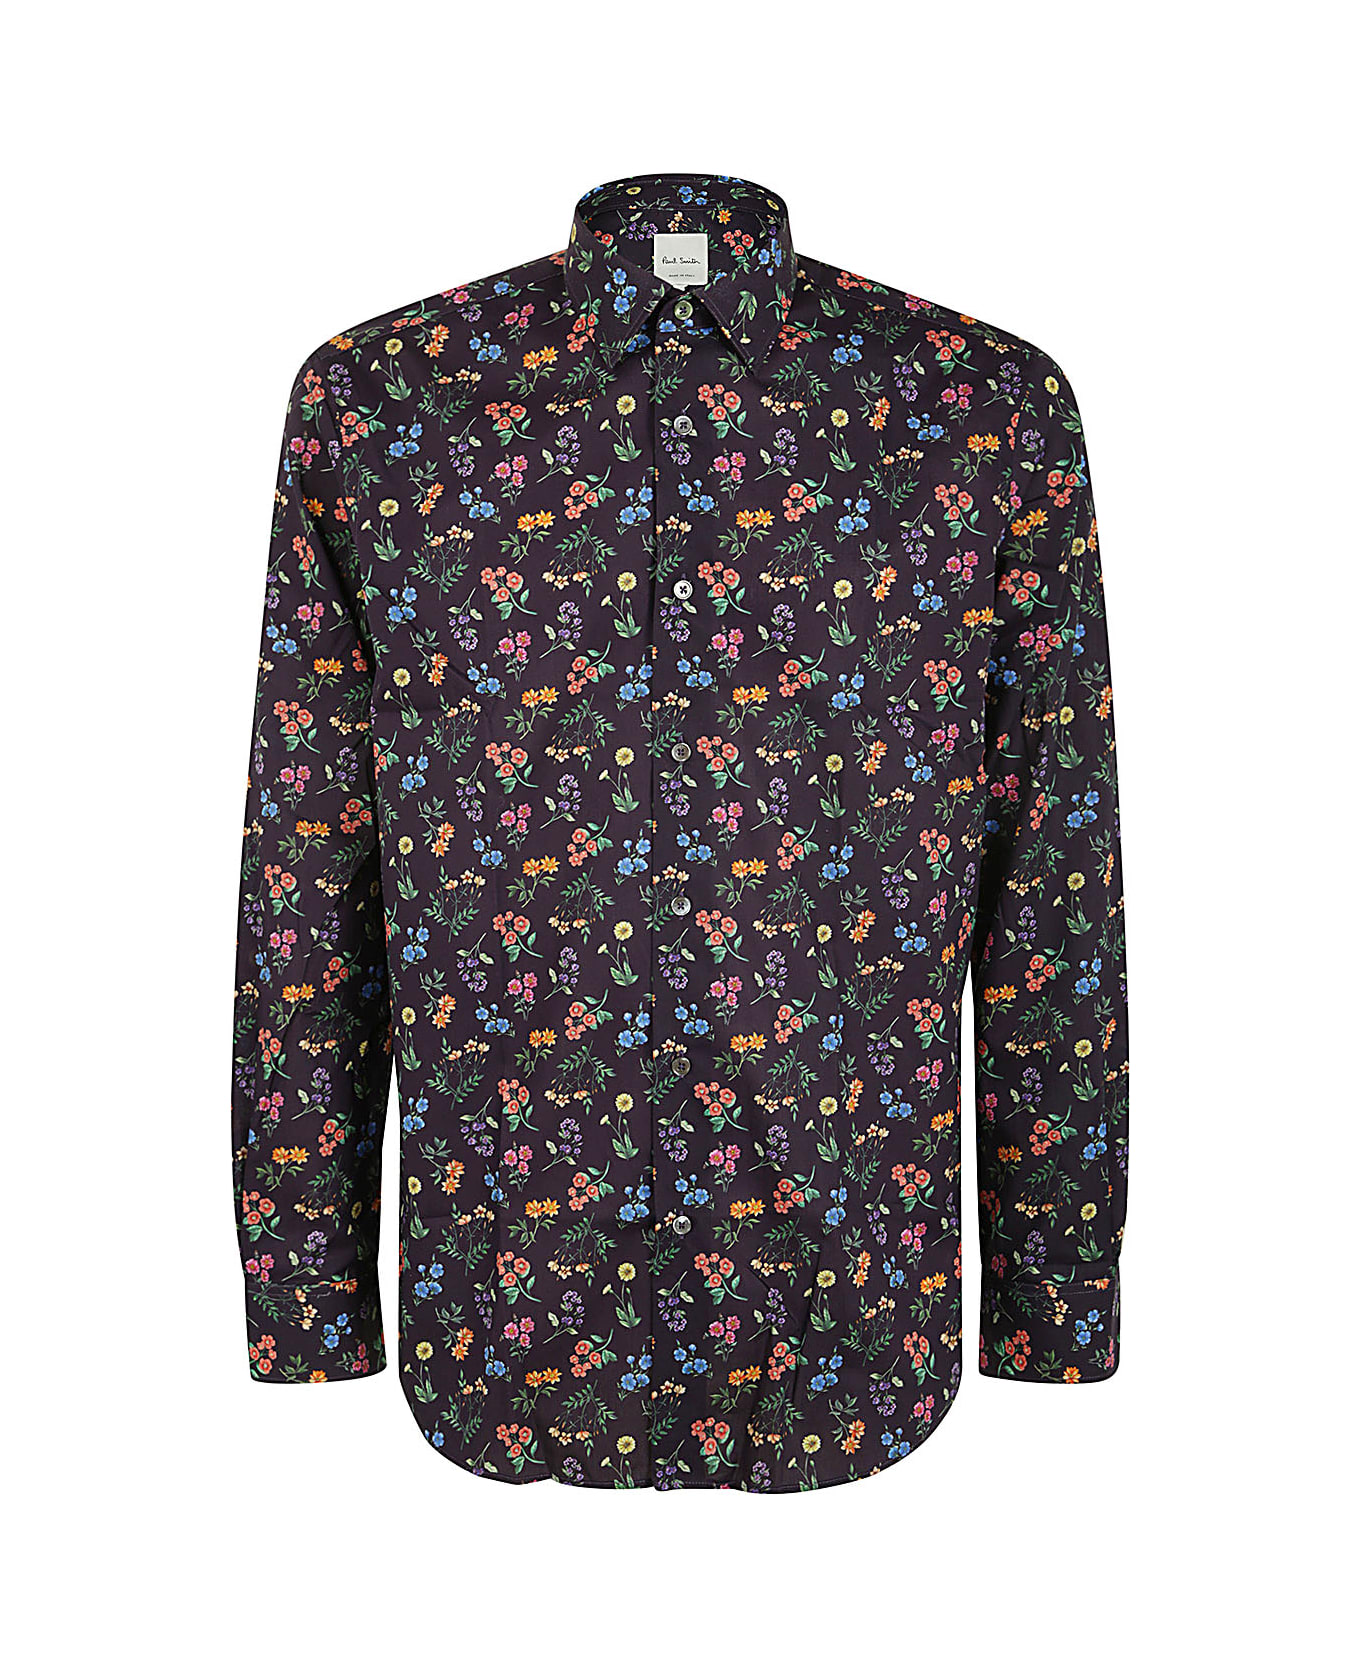 Paul Smith Mens Tailored Fit Shirt - Blues シャツ